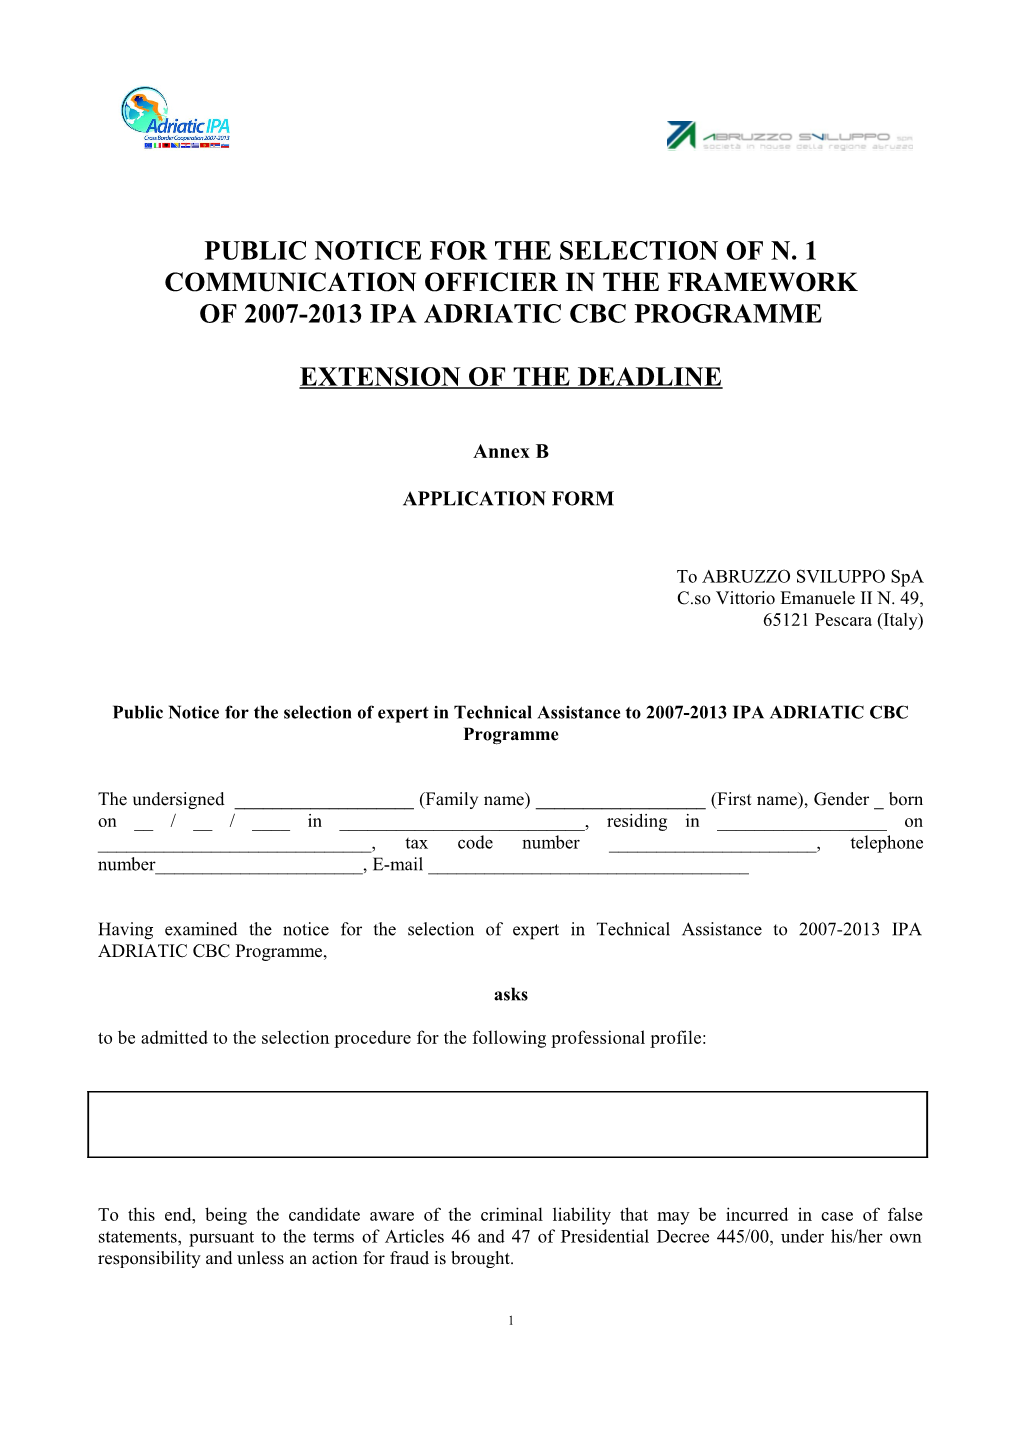 Public Notice for the Selection of N. 1 Communication Officier in the Framework of 2007-2013